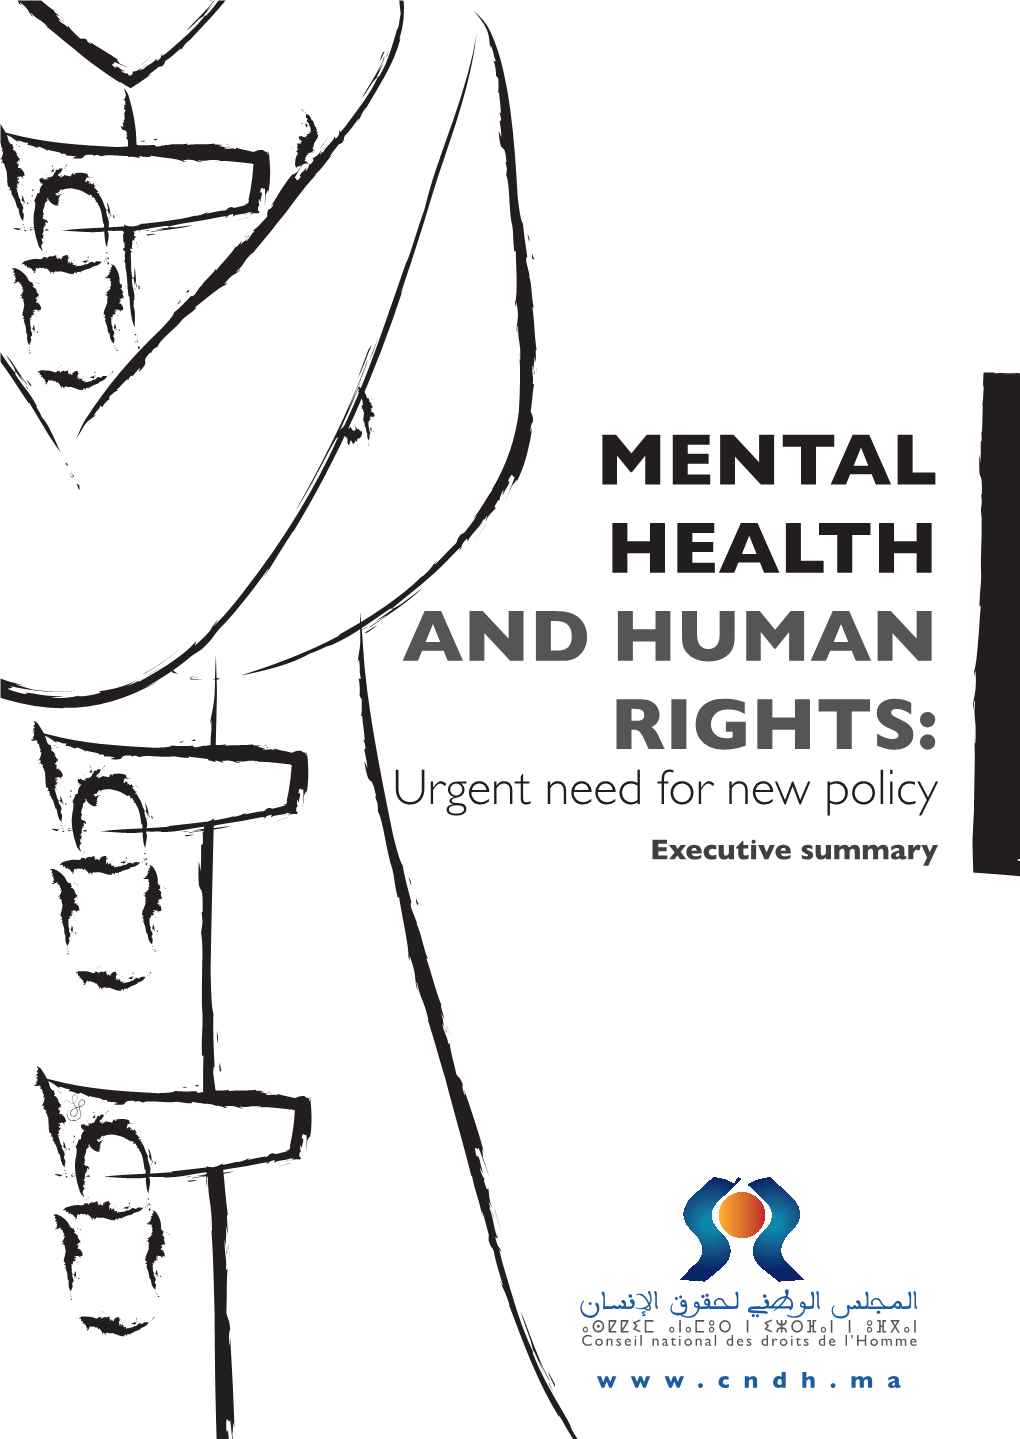 MENTAL HEALTH and HUMAN RIGHTS: Urgent Need for New Policy Executive Summary